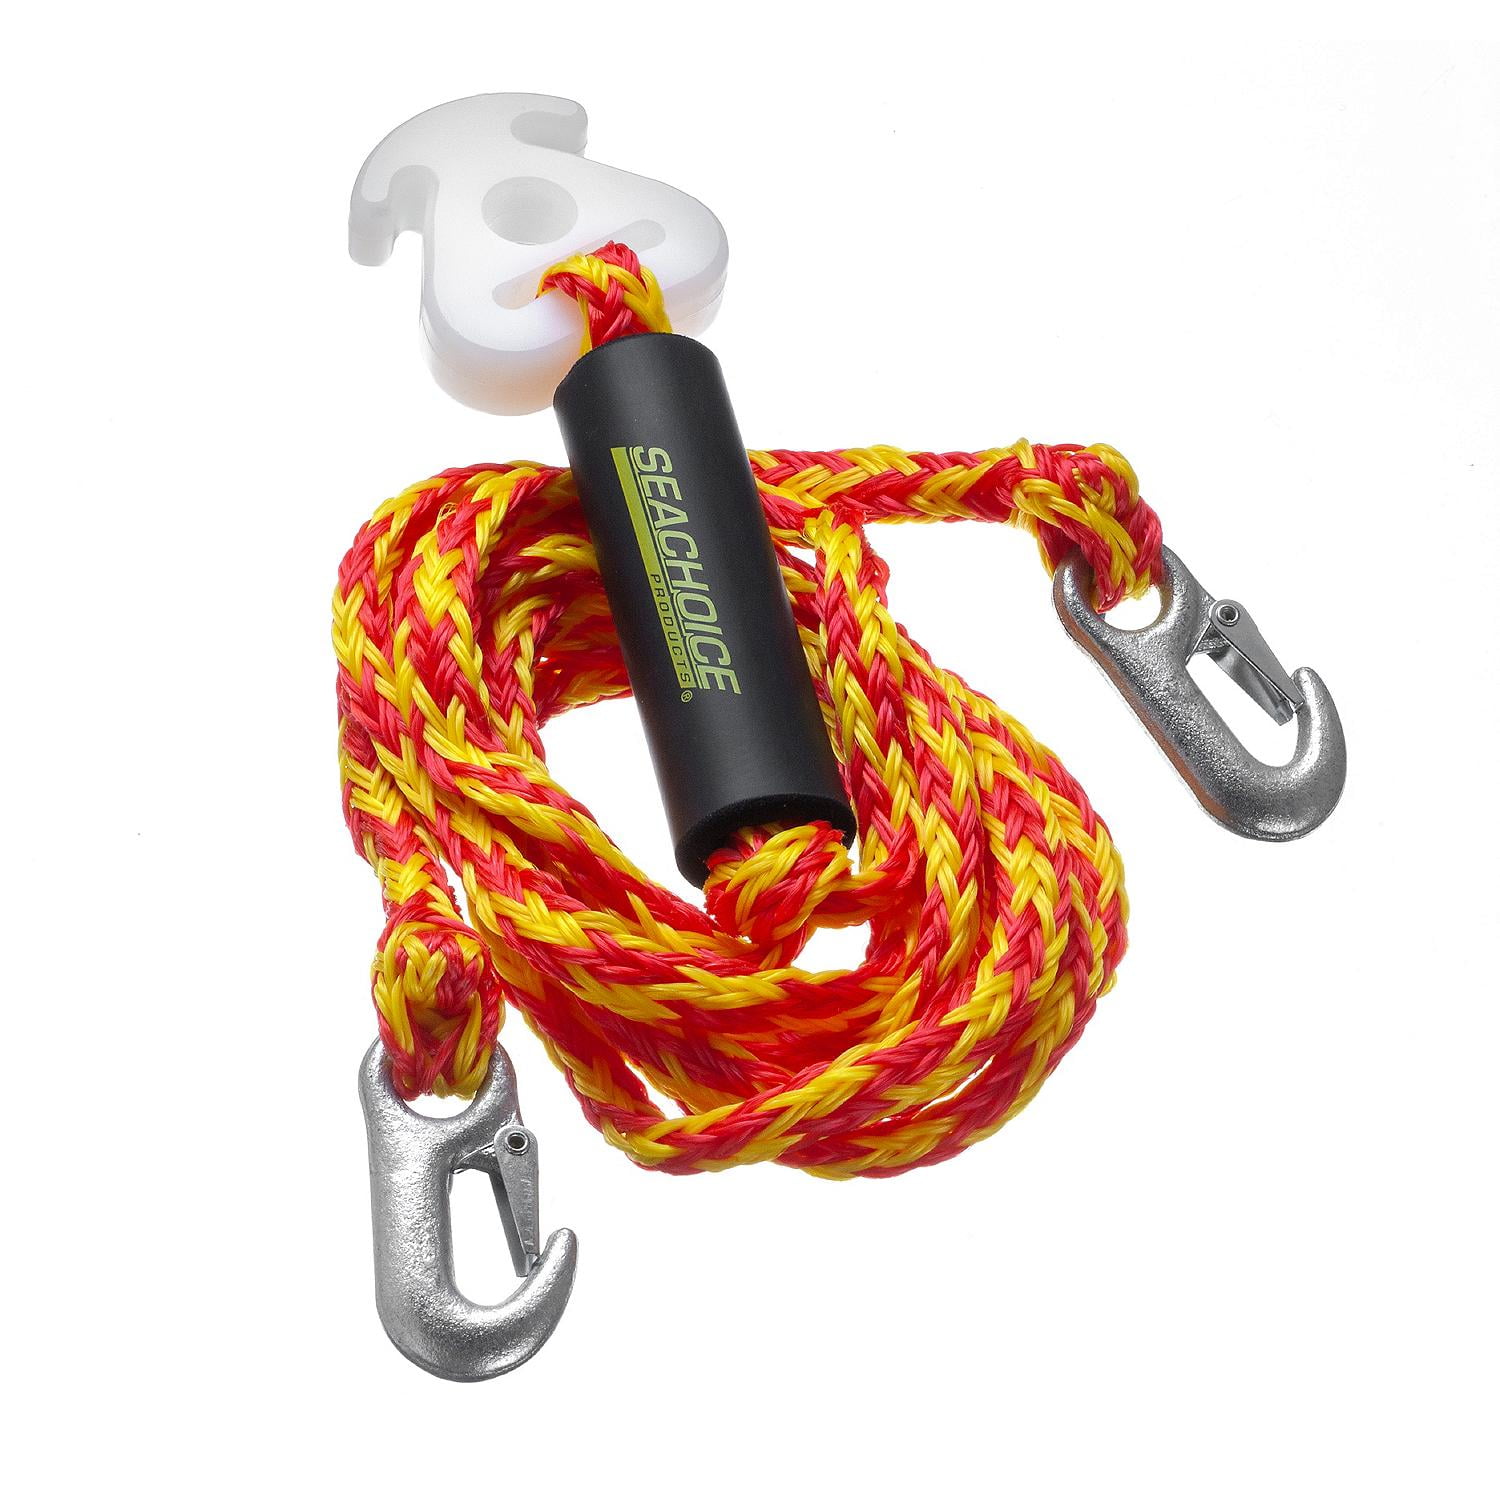 24 ft Heavy Duty Boat Tow Harness, Boat Tow Ropes, Easy Connection w/ 3 Stainless  Steel Larger Hooks, SELEWARE